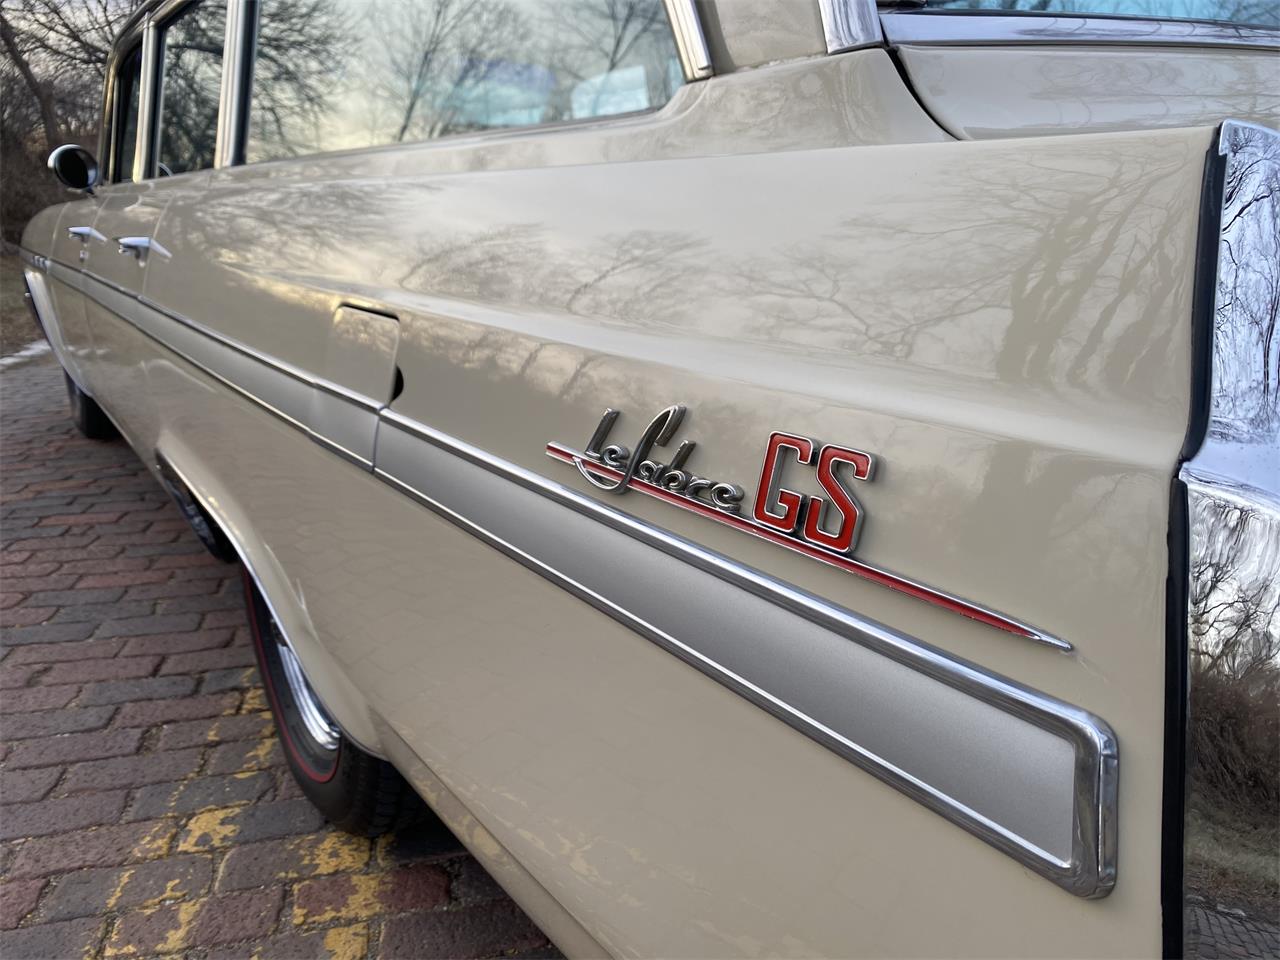 1964 Buick LeSabre Wagon for sale in Elkhorn, NE – photo 86